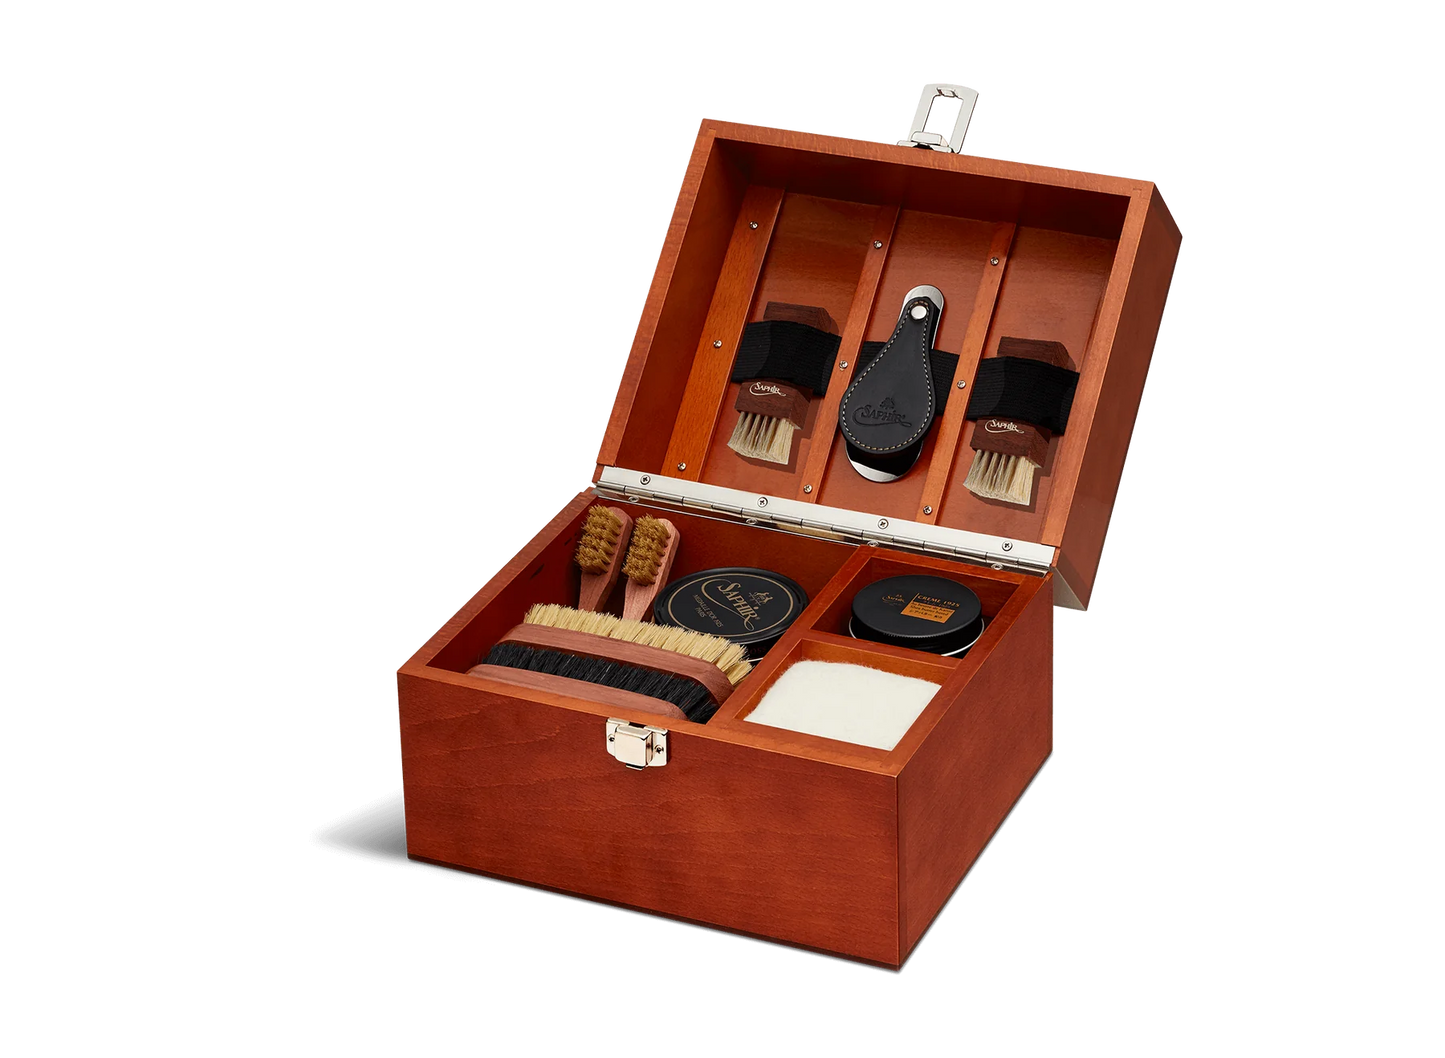 For the leather connoisseur. Presented in a stunning Beechwood box. A wonderful gift or addition to the shoe arsenal. Solid beech frame made in France, with a natural finish and vegetal leather trims.    The Groom Deluxe Box contains the following:  2 x 100ml shoe polish tin (1 x black, 1 x dark brown) 1 x renovator cream 2 x Spatula brushes 2 x Shoe polisher brushes 2 x Small spreaders 1 x Polish cloth  &nbsp;Size: 37X20X15cm